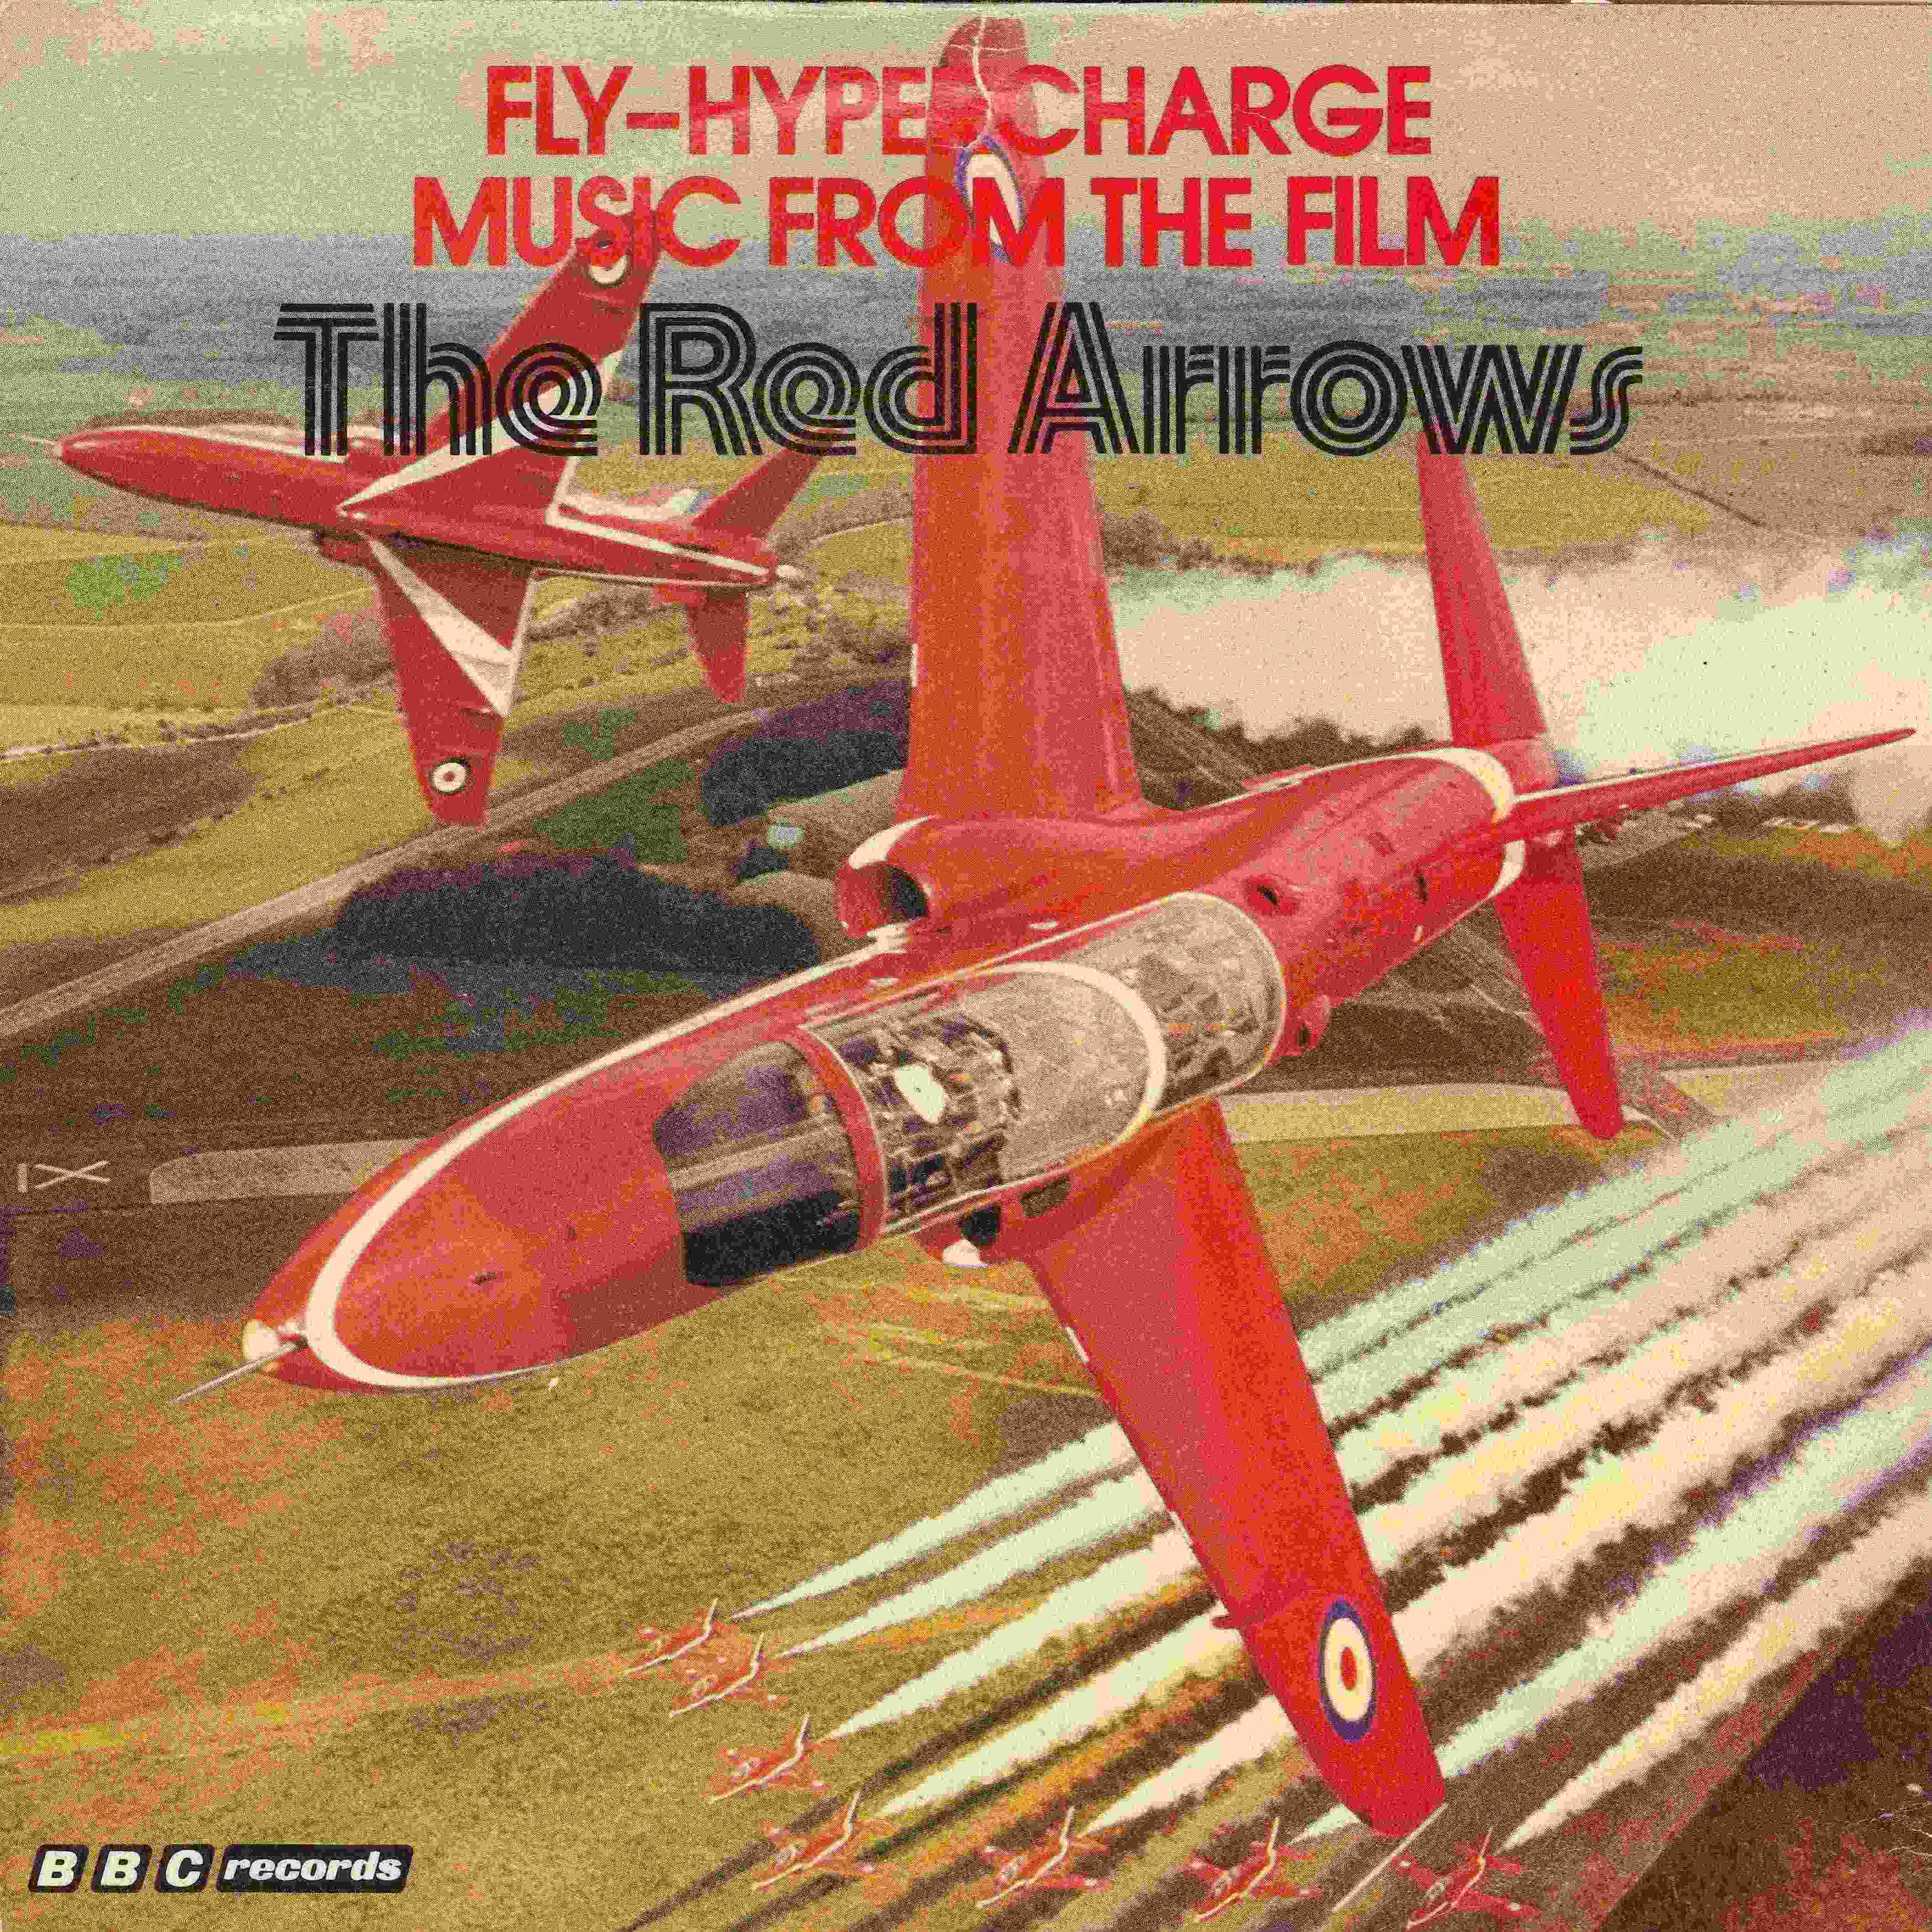 Picture of RESL 95 Fly (The Red Arrows) by artist Dittrica / Ironton / Monkman / The O. D. S. Band from the BBC records and Tapes library